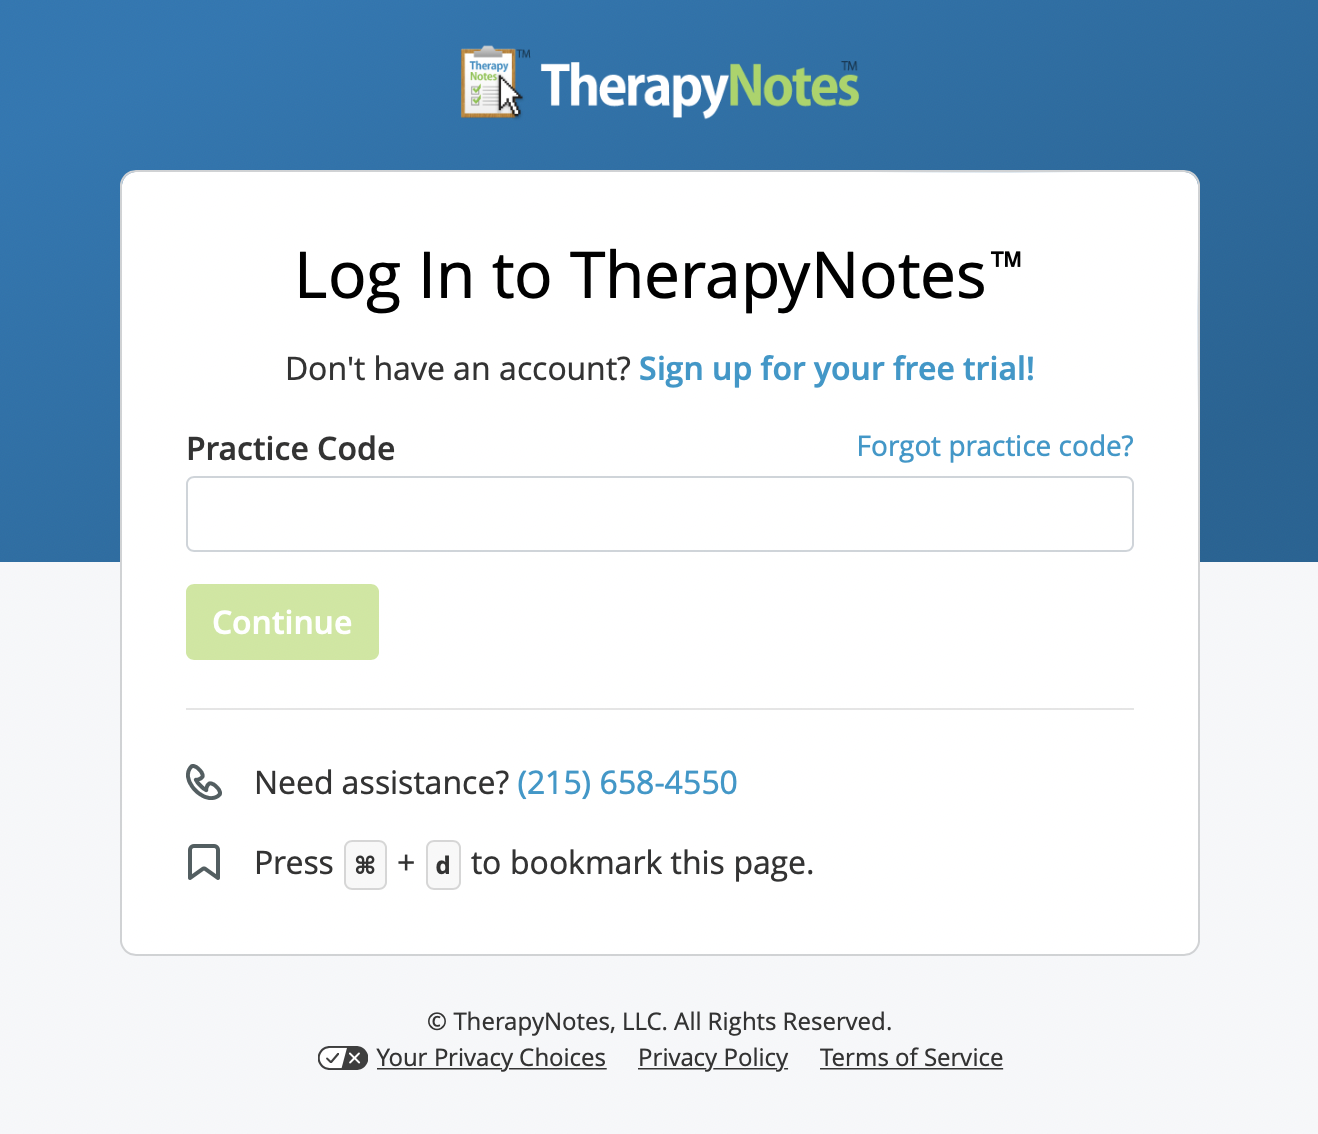 TherapyNotes Log In Page with Practice Code field